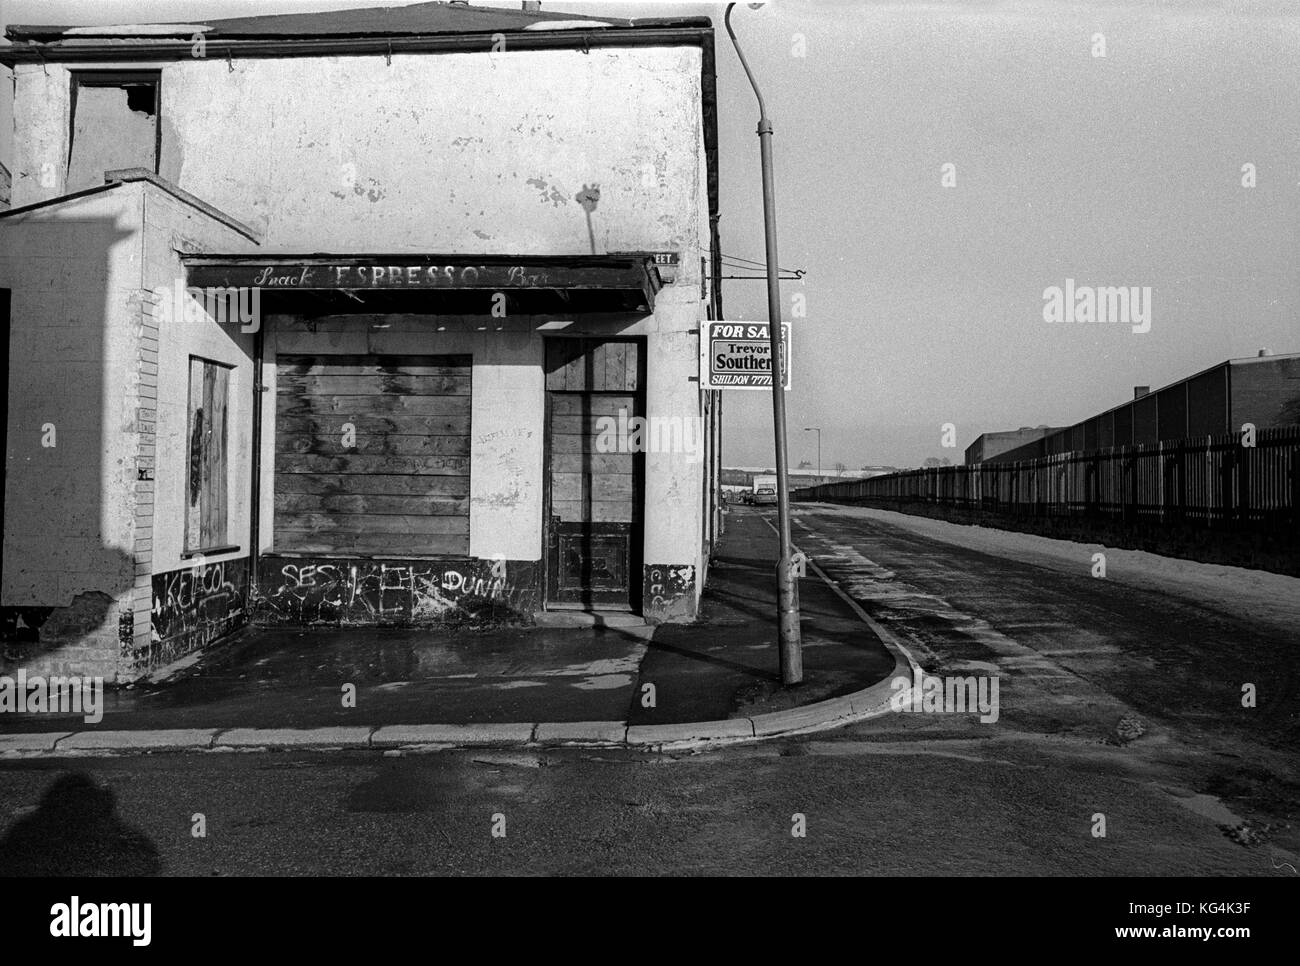 Shildon in County Durham 1986s. Once a town known as 'the cradle of railways'.  In 1984 the railworks collaped and left it a community of unemployment and economic decline for the next decade. Stock Photo